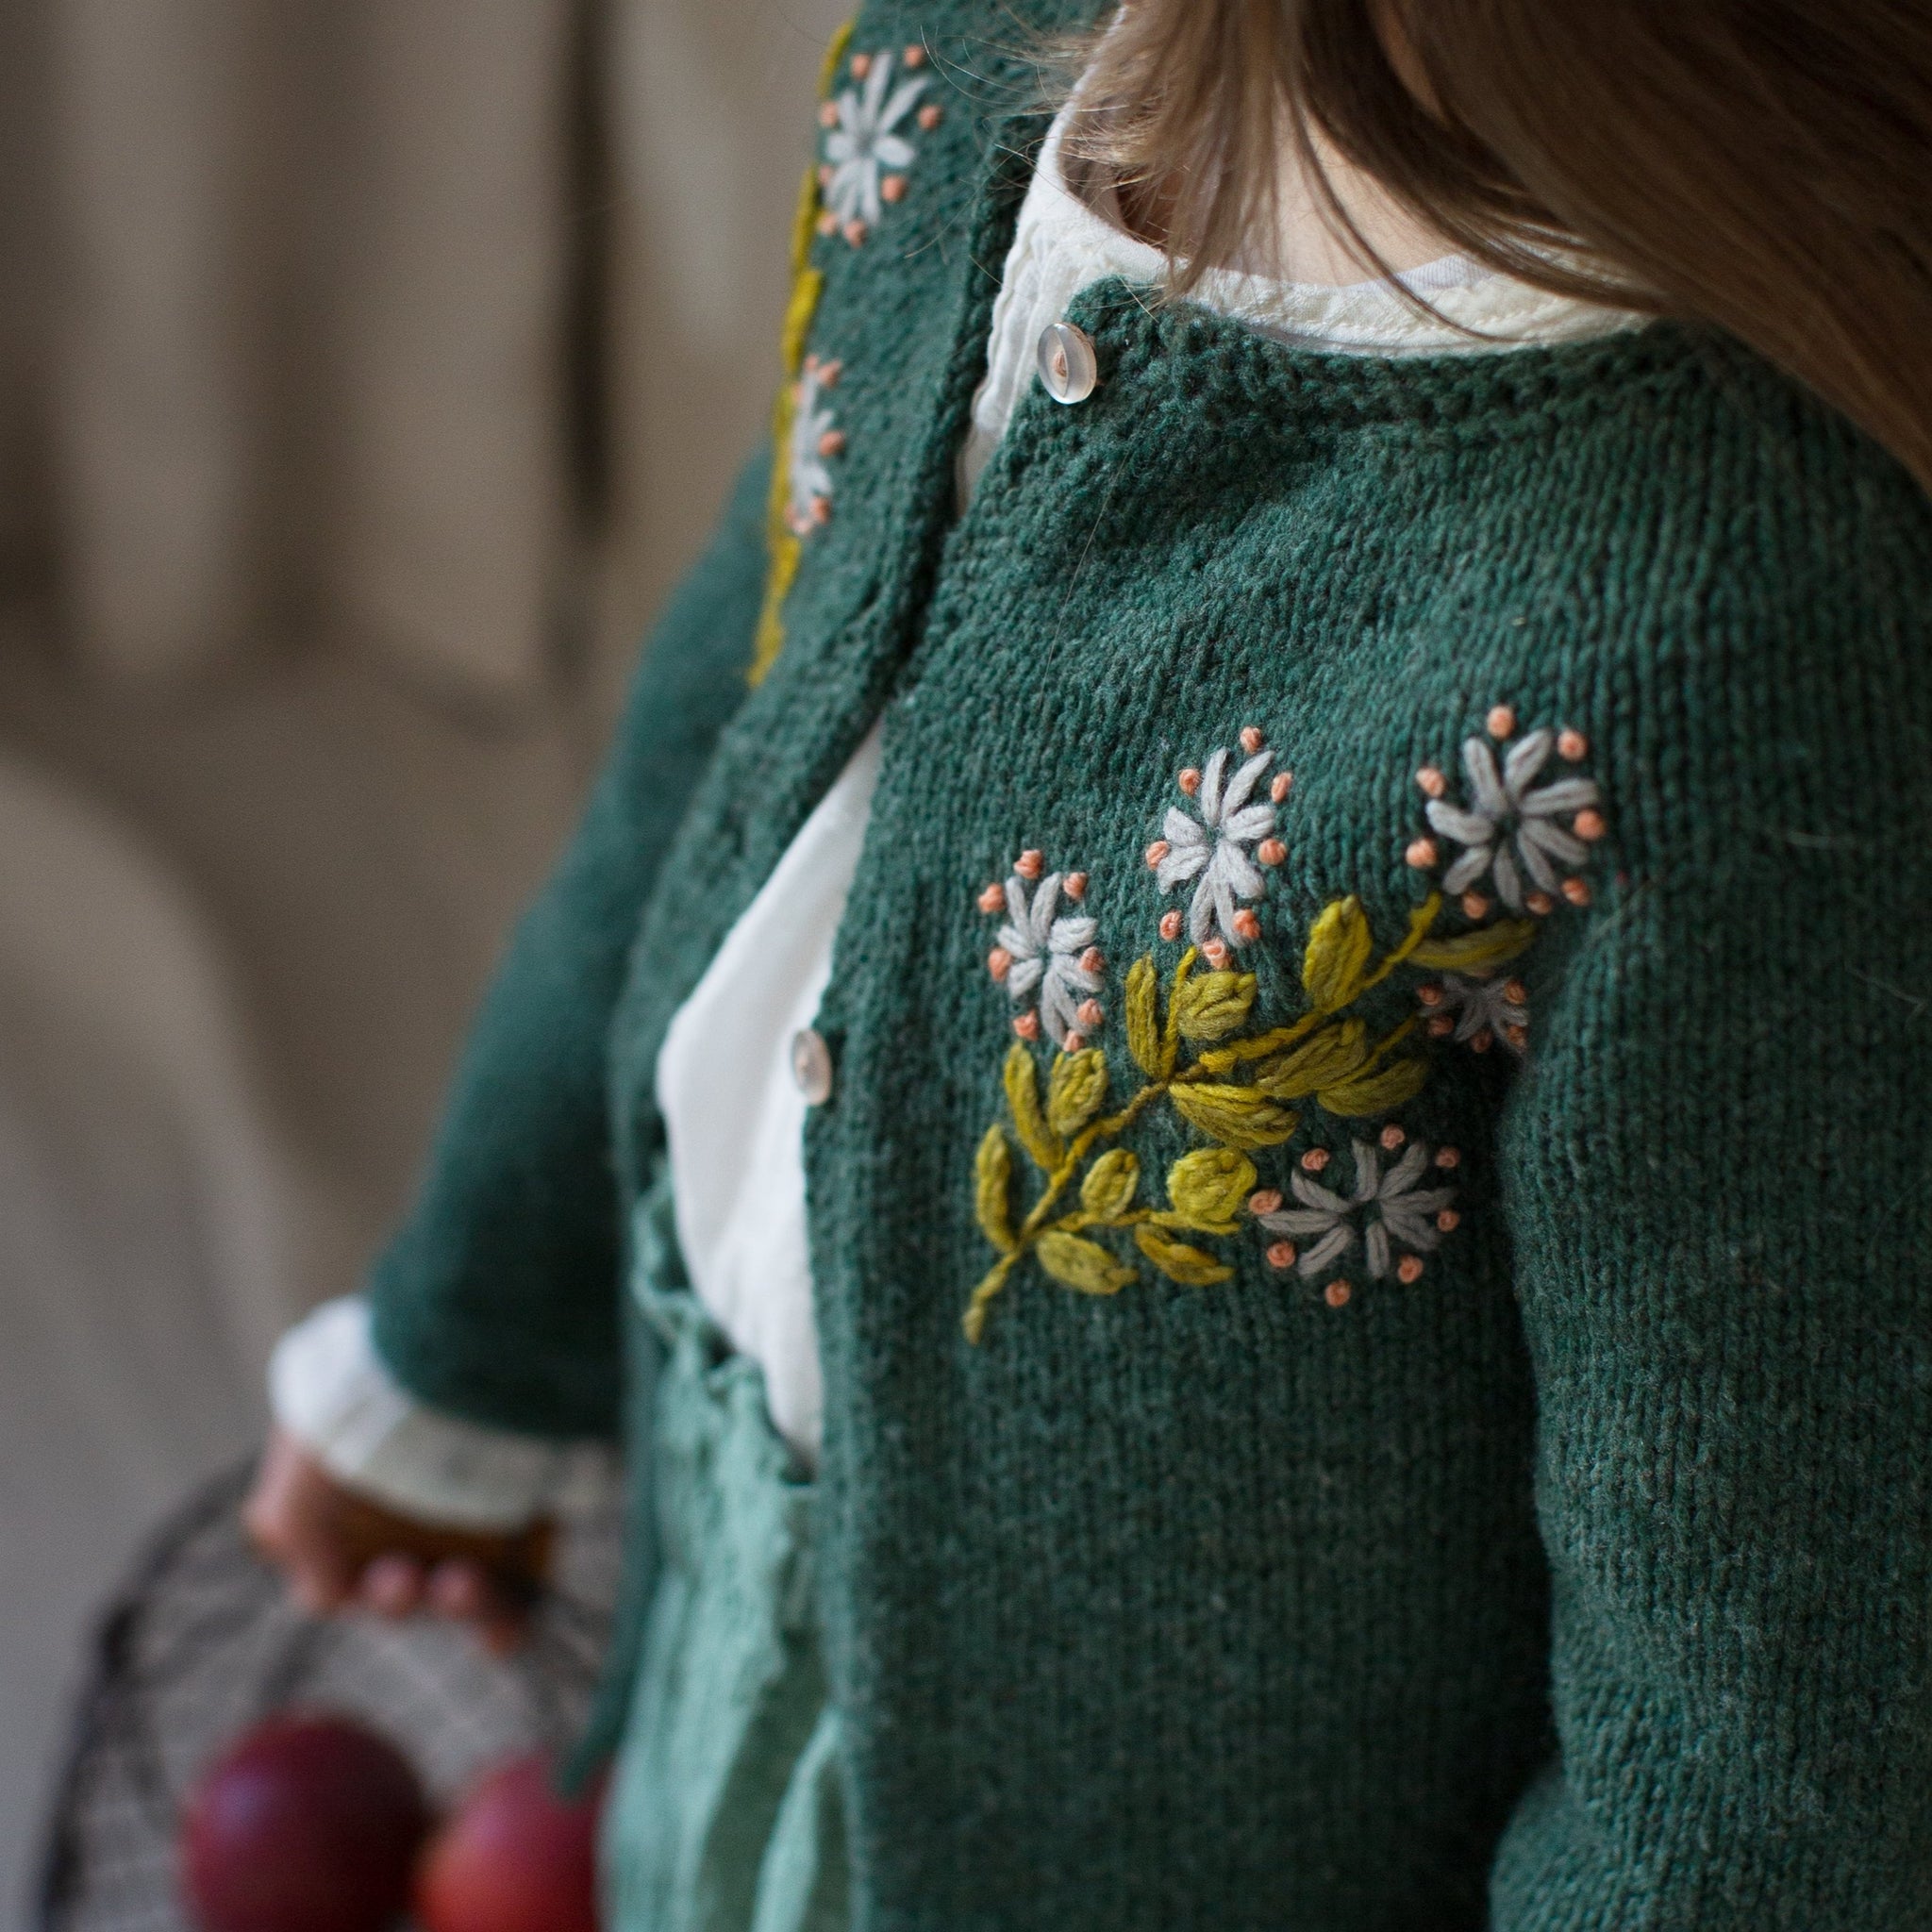 Embroidery On Knits by Judit Gummlich – Monarch Knitting